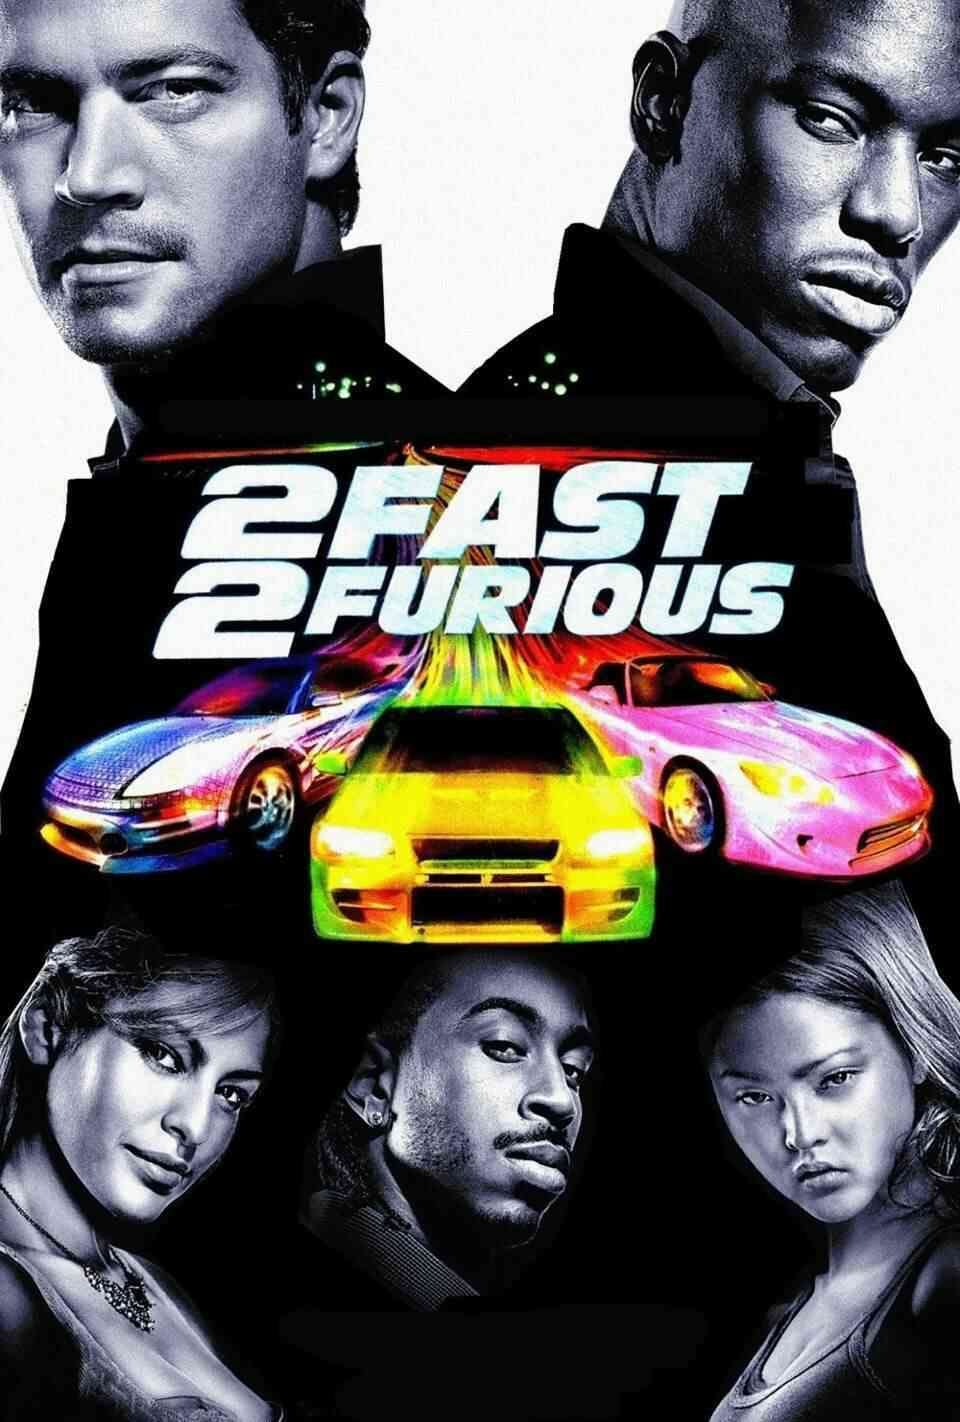 Read 2 Fast 2 Furious screenplay (poster)